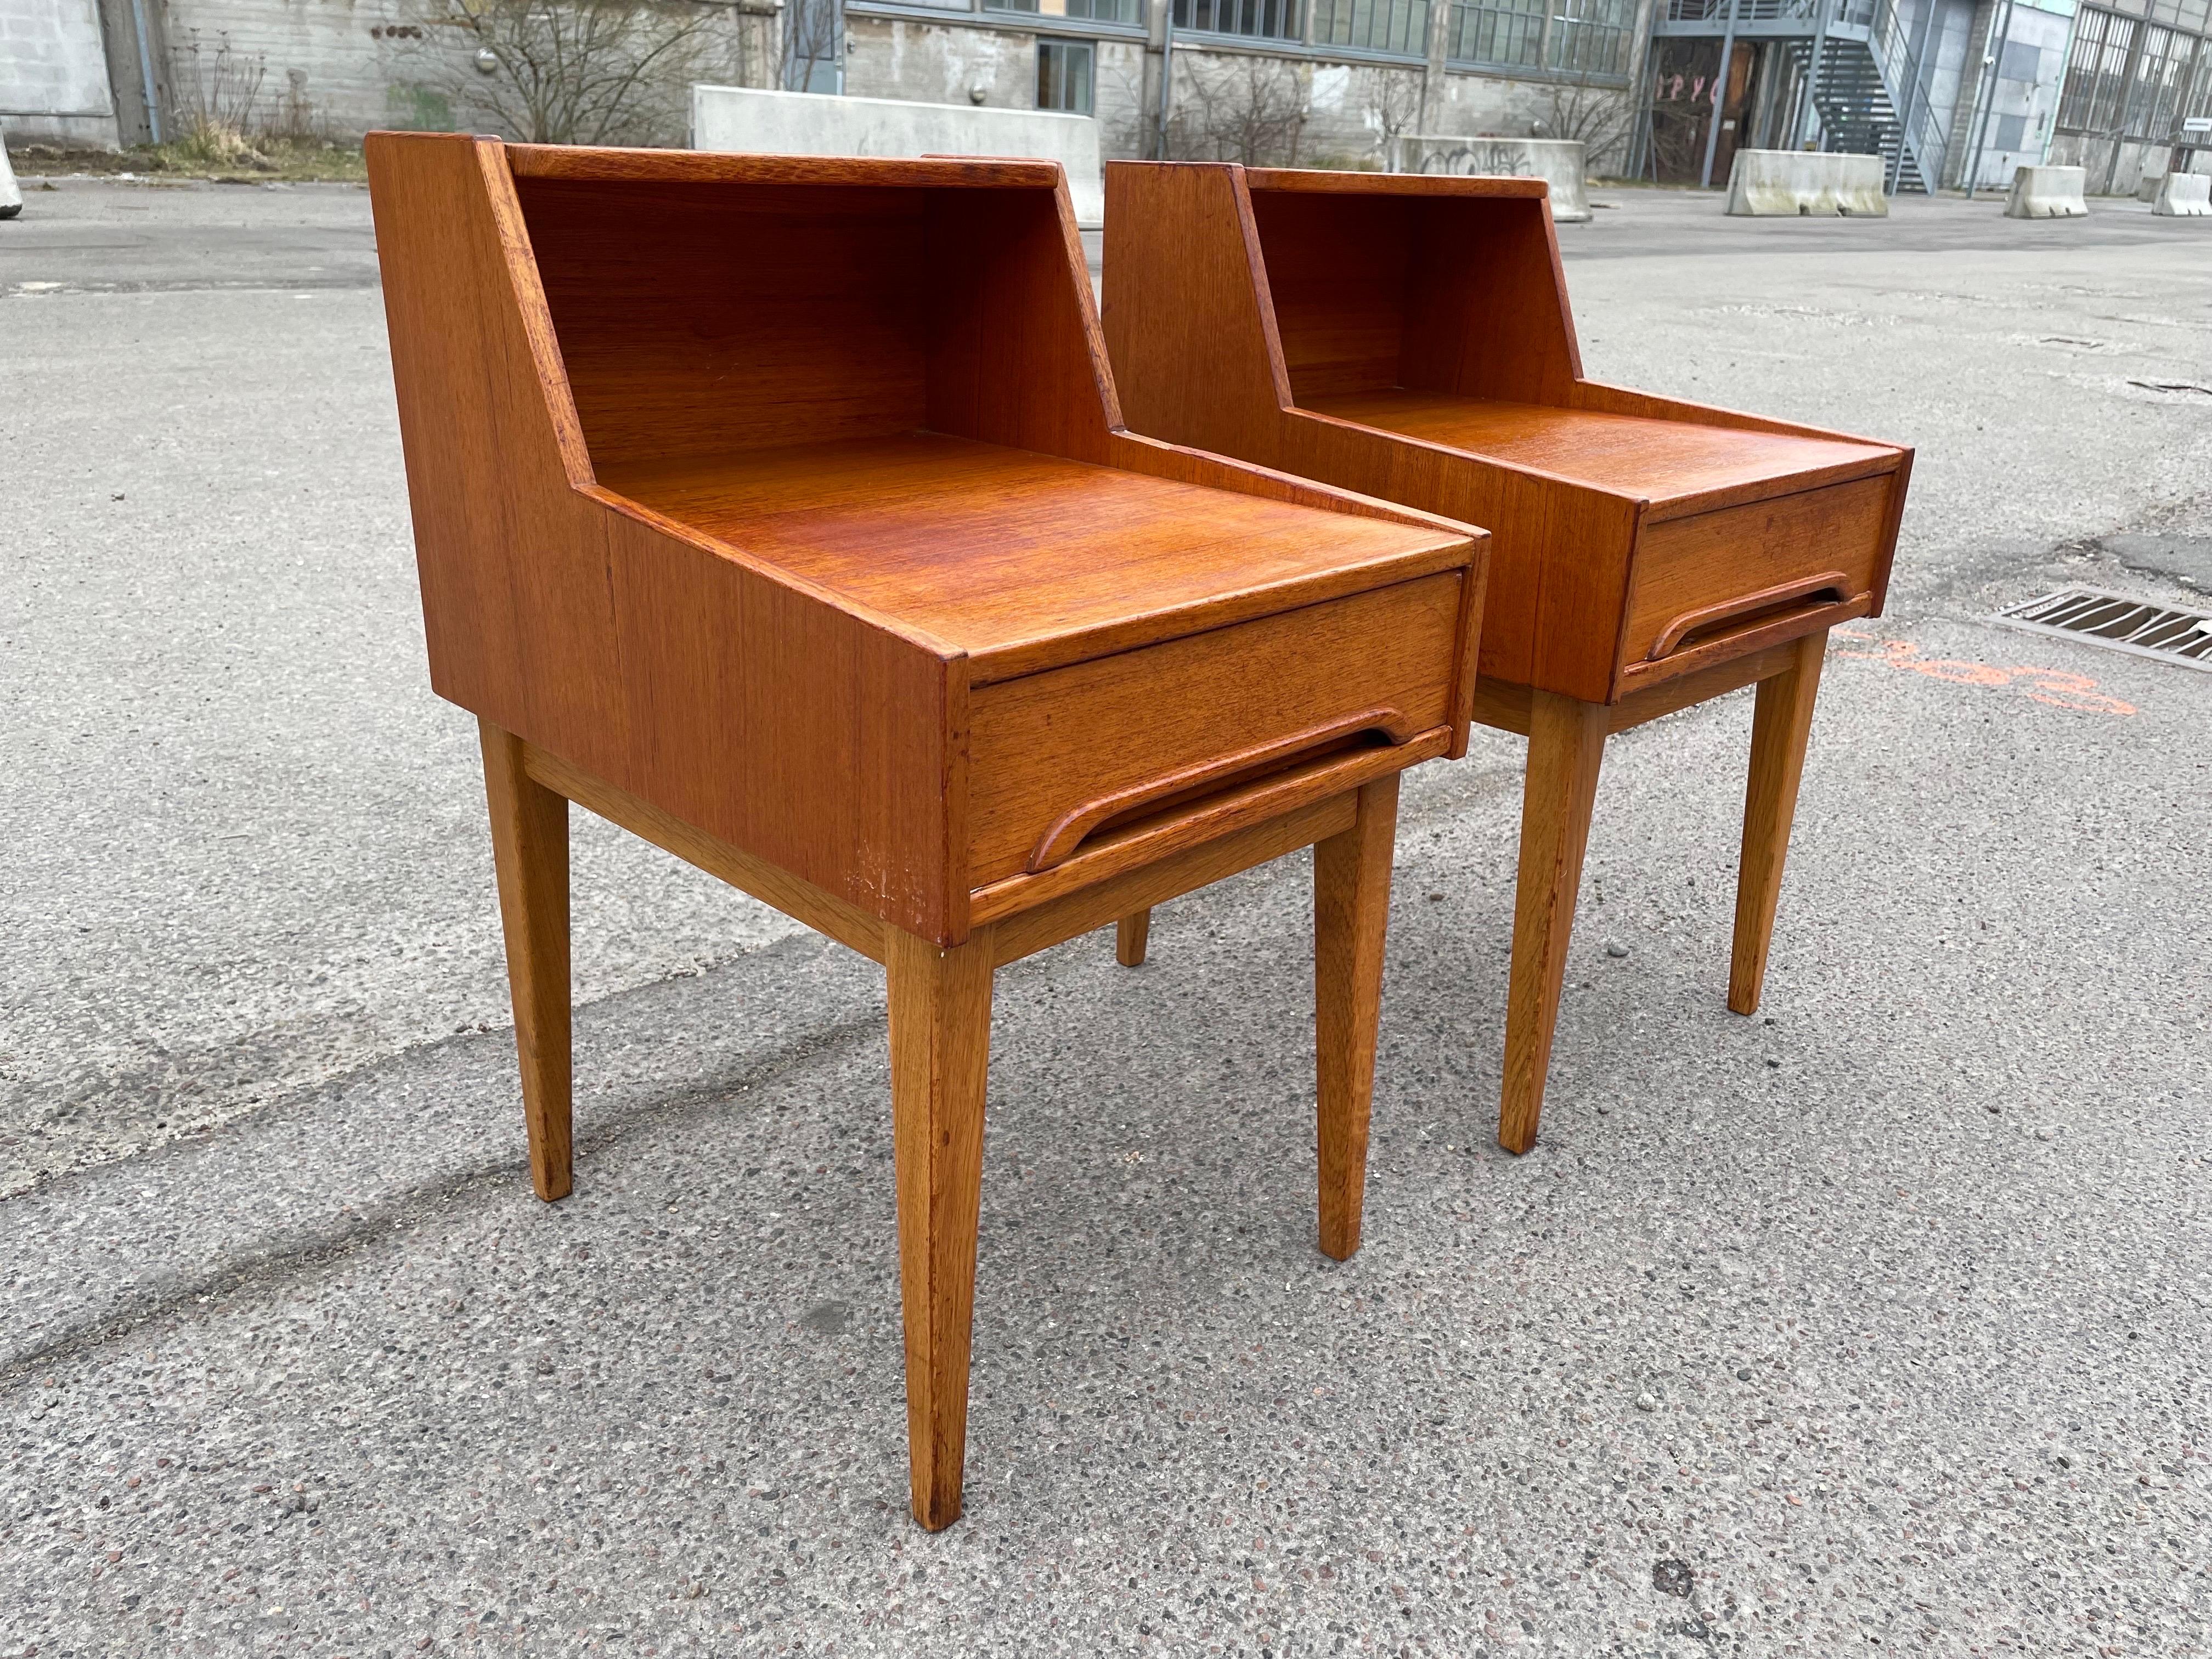 A beautiful set of Fully functional Midcentury Nightstands with minor issues, check the pictures.